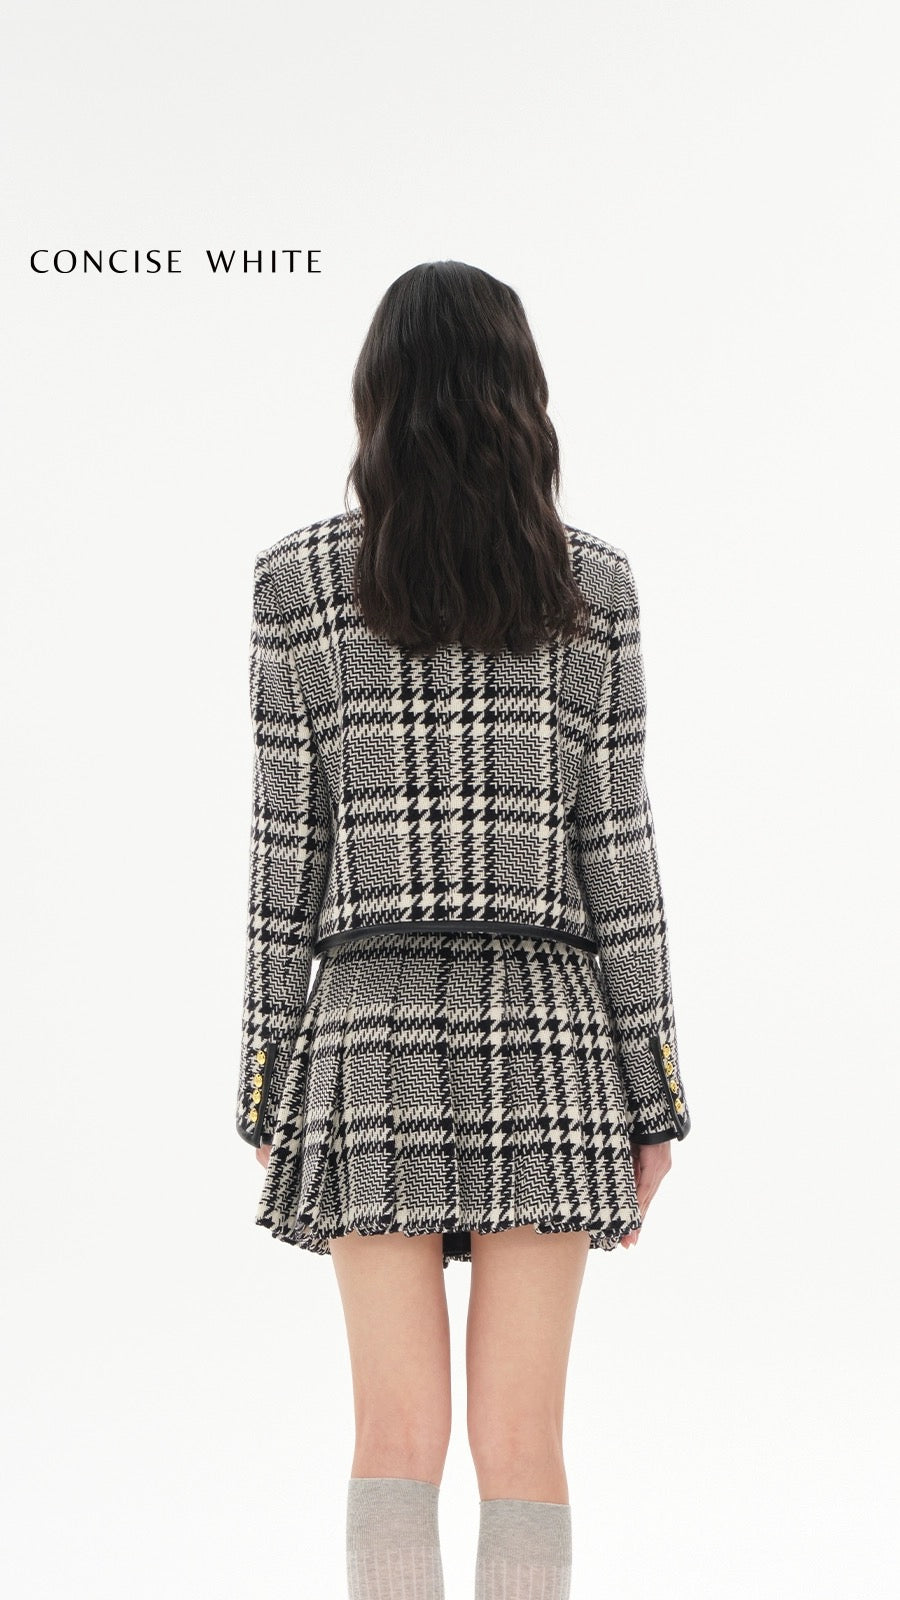 Concise-White Houndstooth Crew Neck Wool Short Coat and Skirt Set